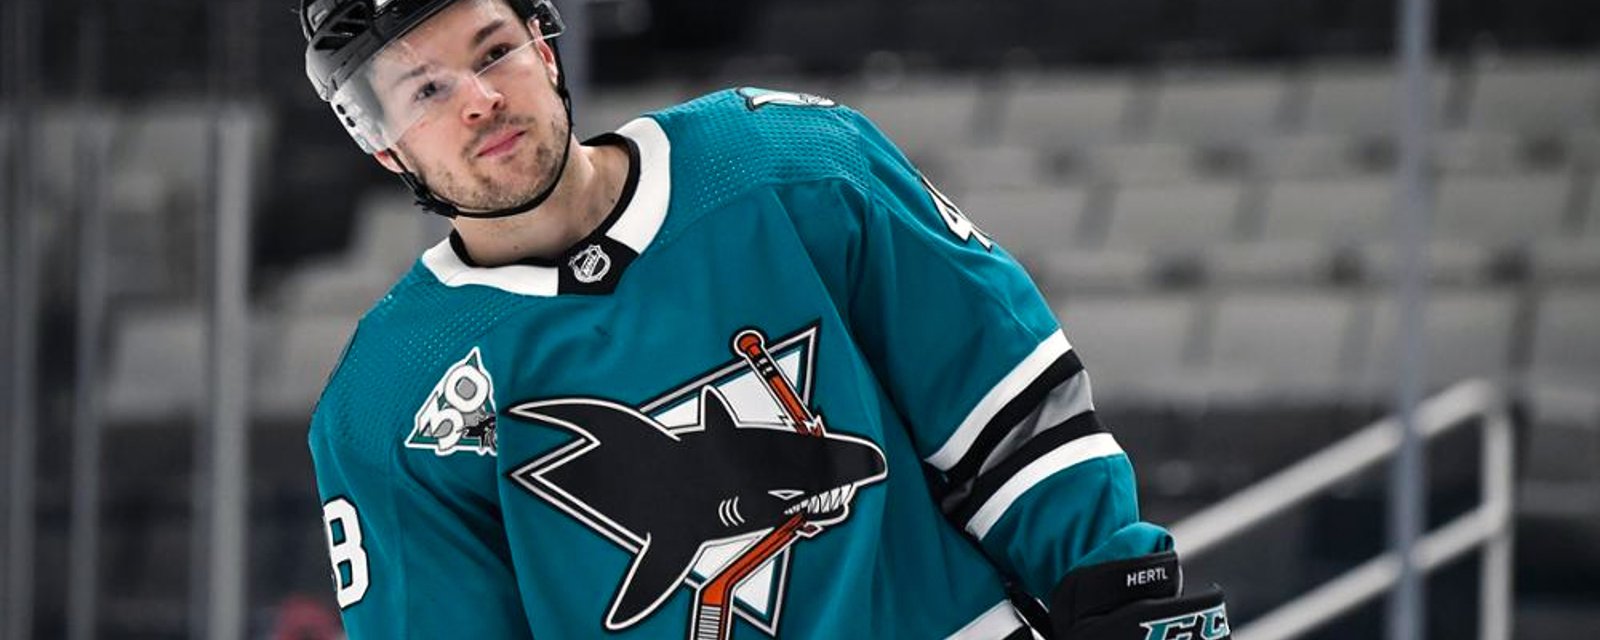 Report: Sharks and Rangers linked in trade talks